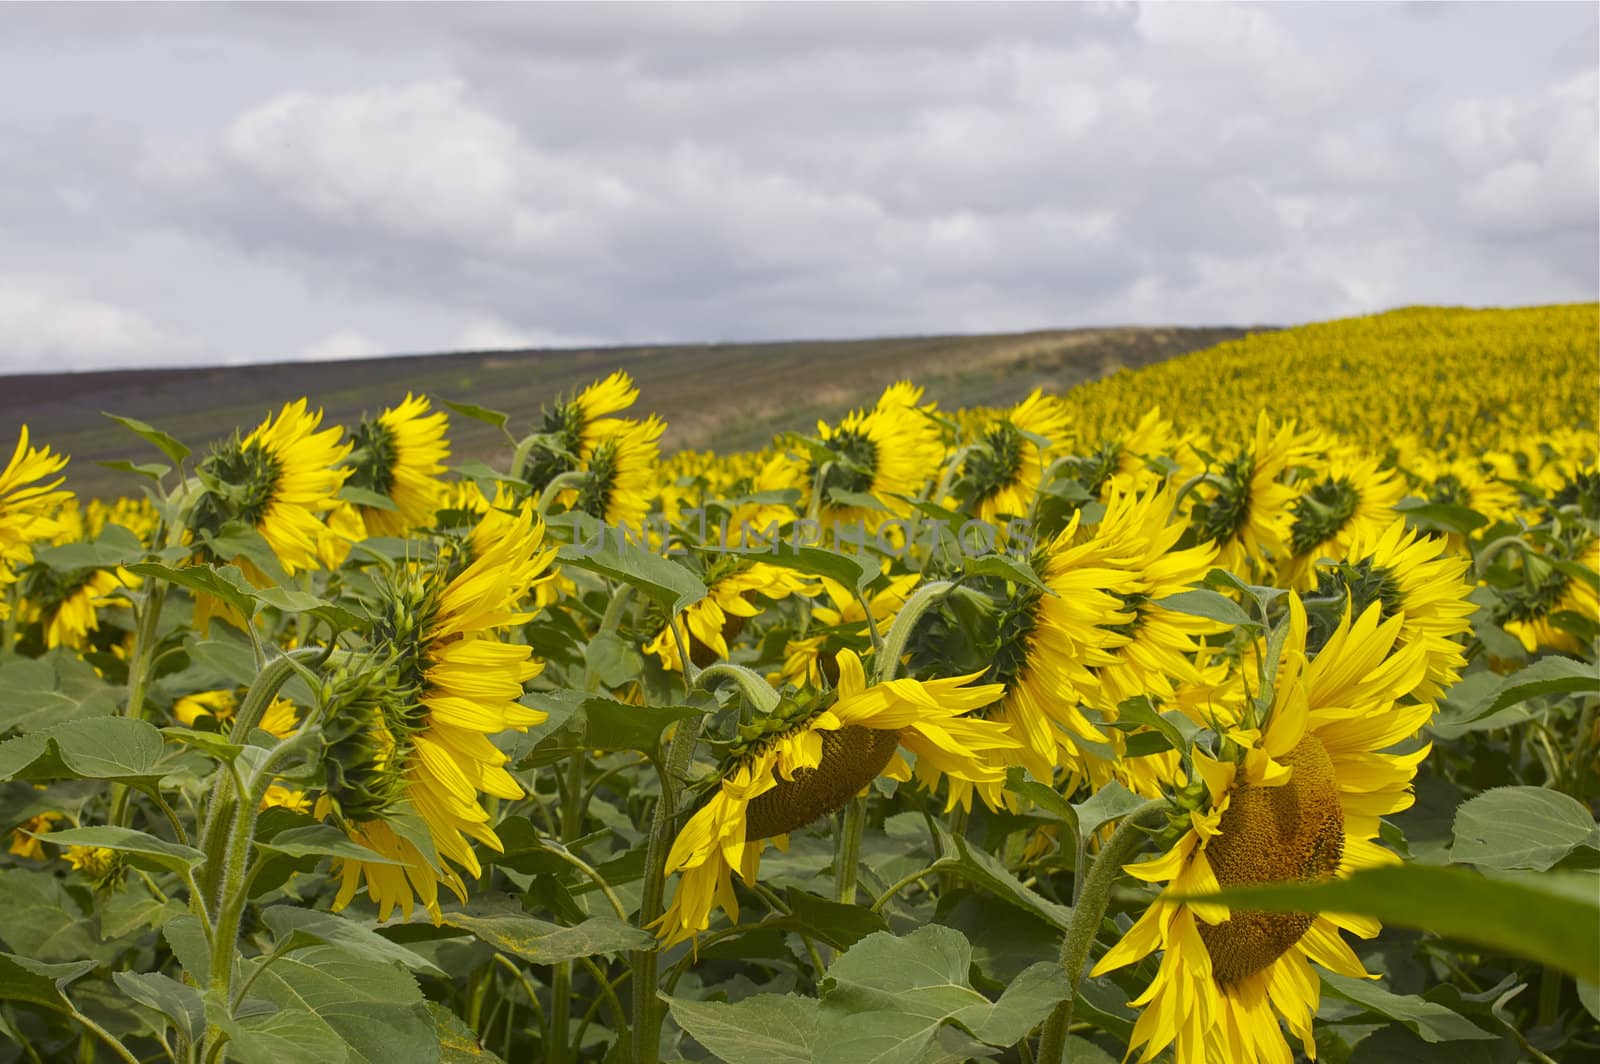 Many hundreds of sunflowers as far as the eye can see in a rural/ agricultural setting, leading up a hill, against a cloudy sky, with copy space.